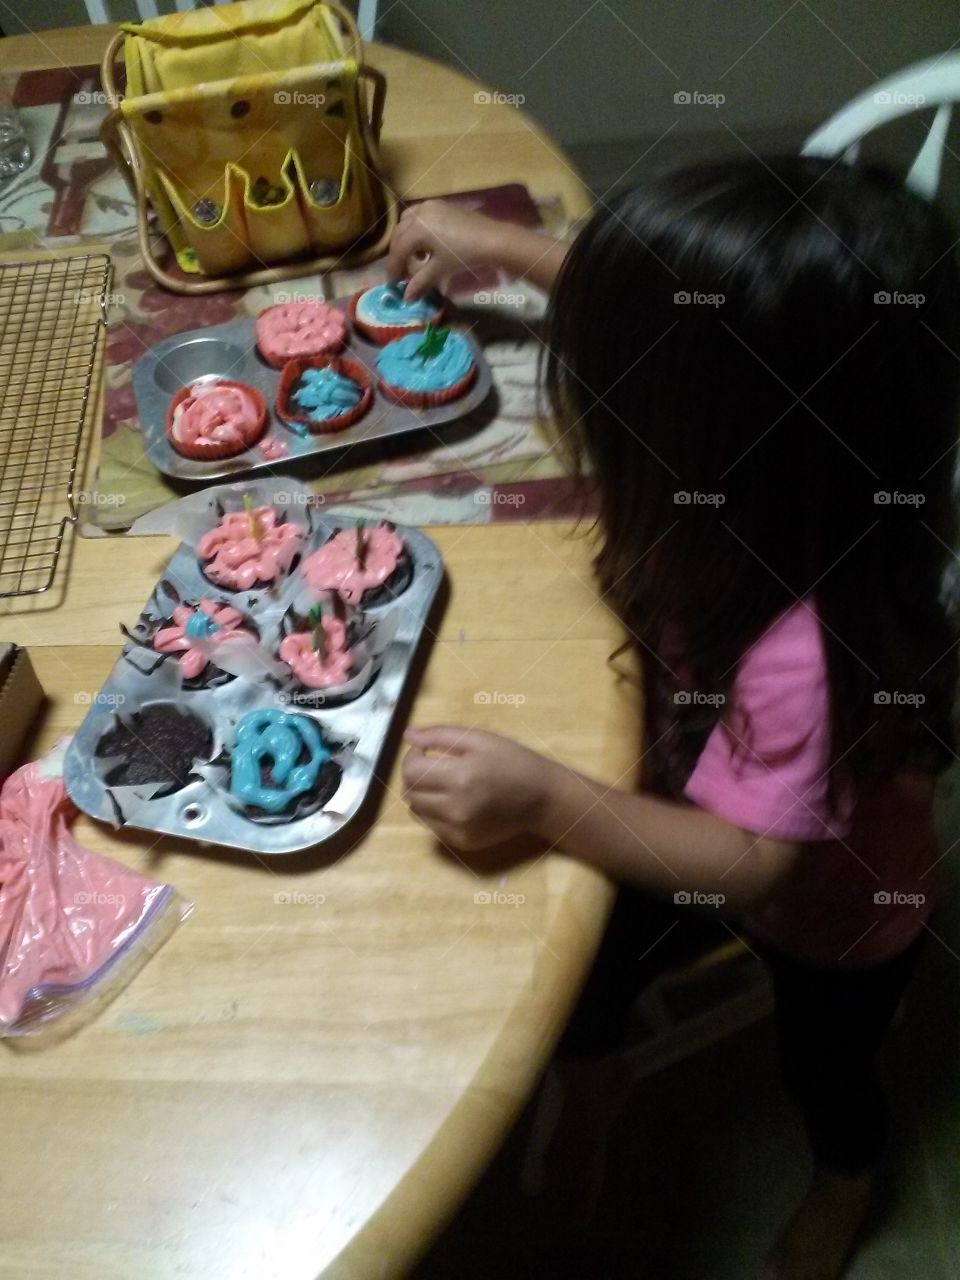 Decorating Cupcakes Toddler Style!